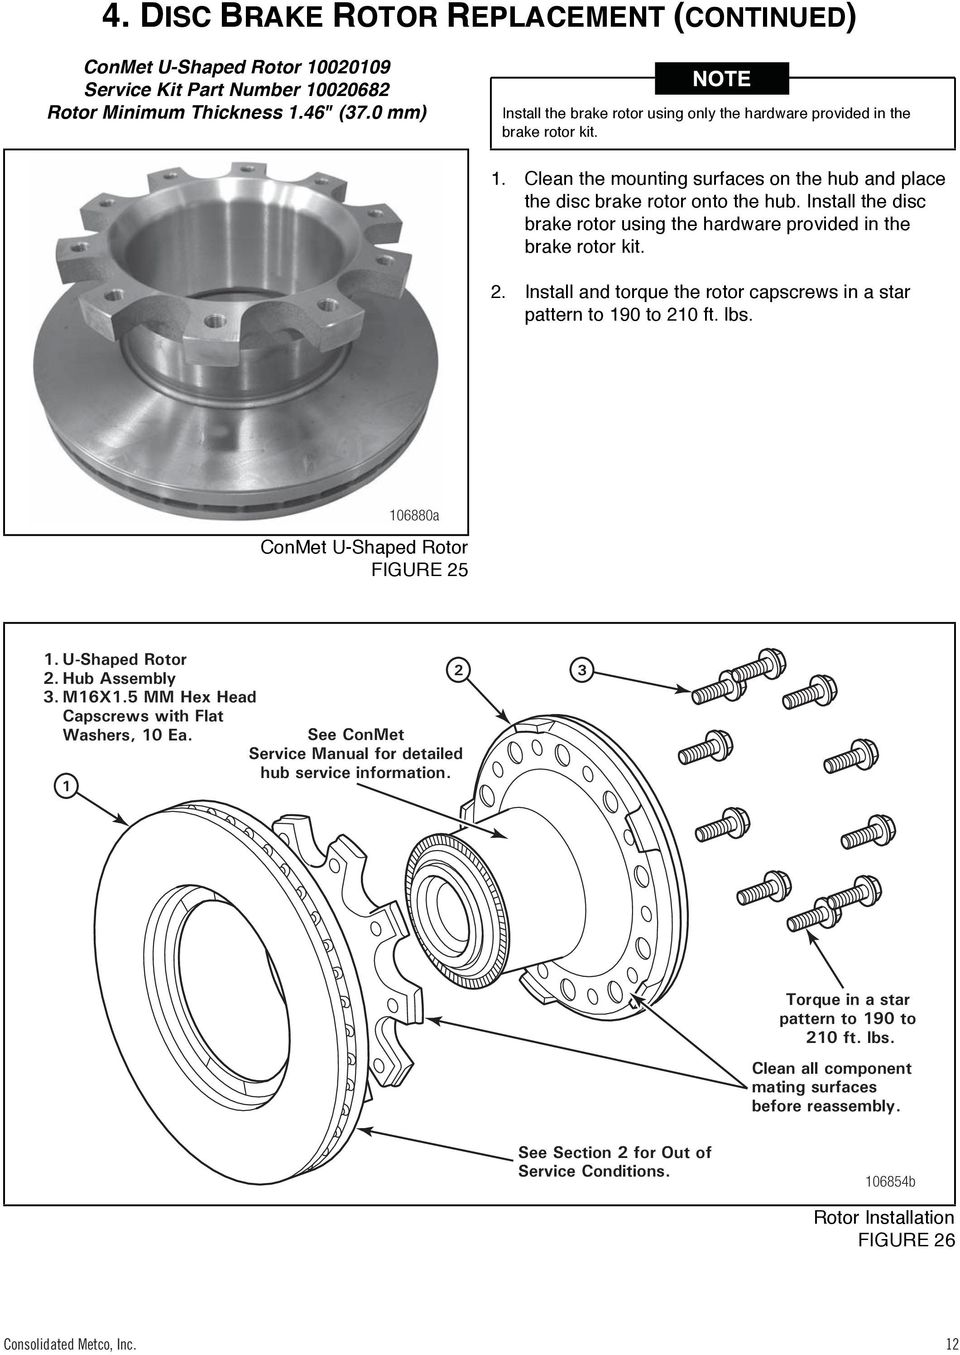 Install the disc brake rotor using the hardware provided in the brake rotor kit. 2. Install and torque the rotor capscrews in a star pattern to 190 to 210 ft. lbs.